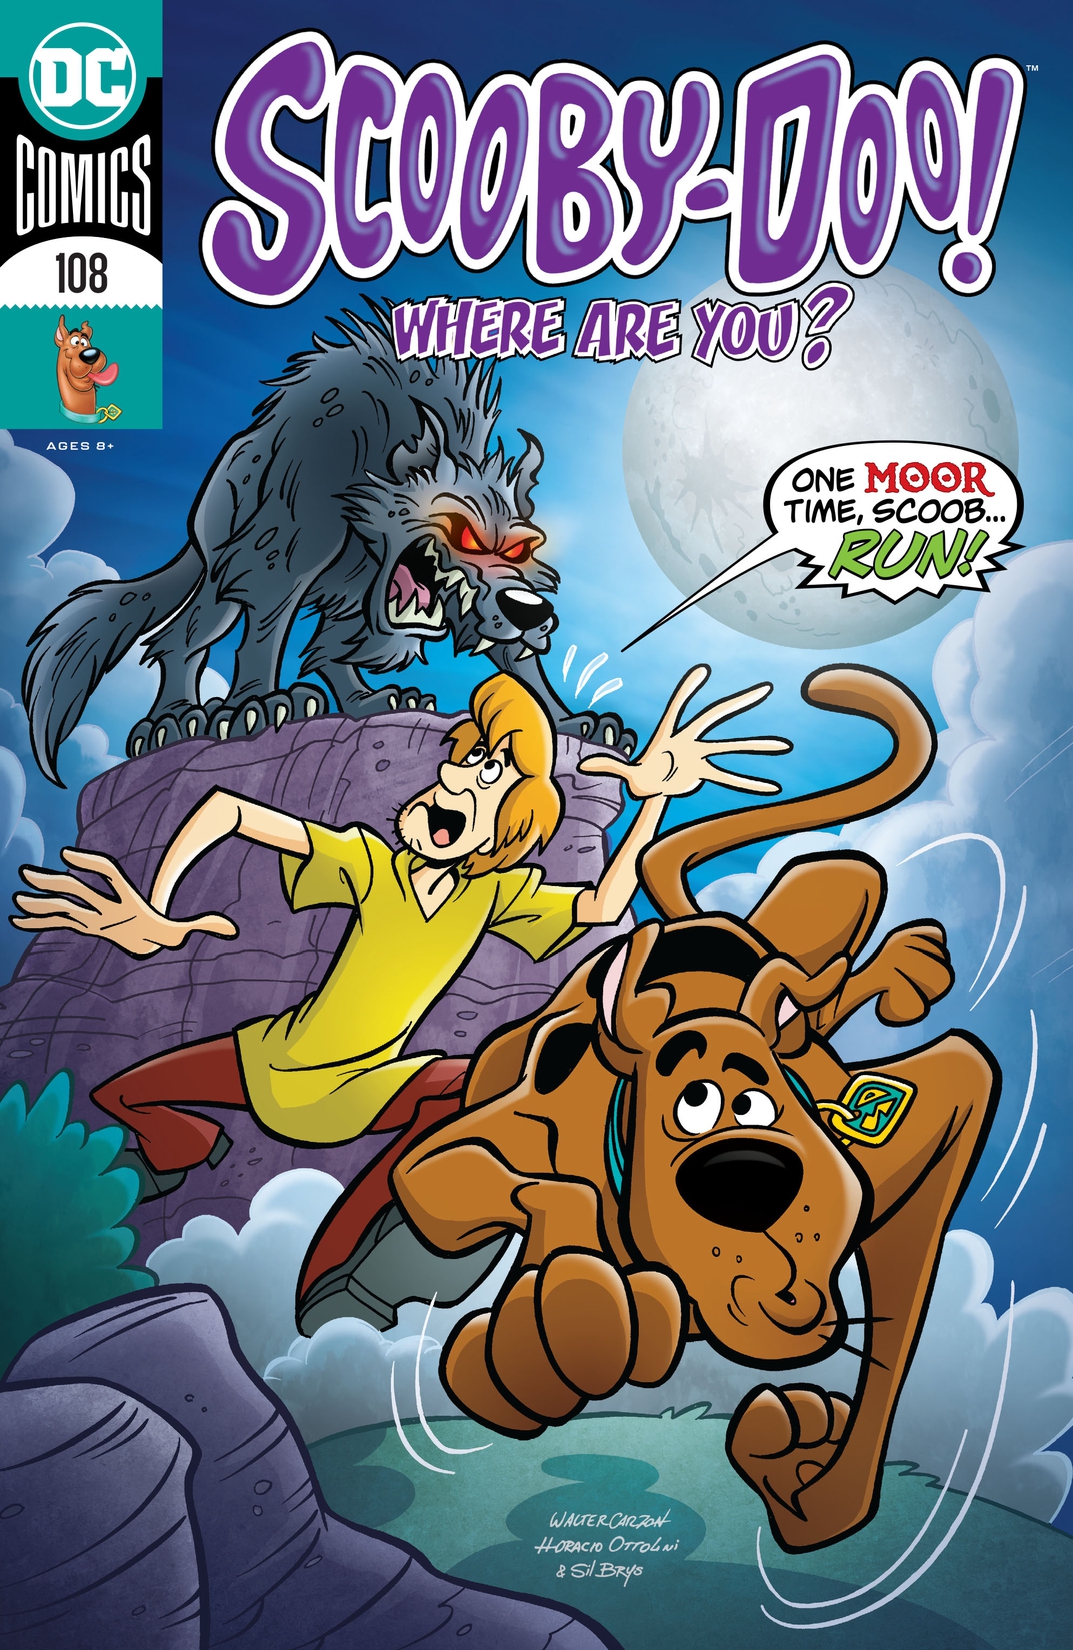 Scooby-Doo, Where Are You? #108 preview images